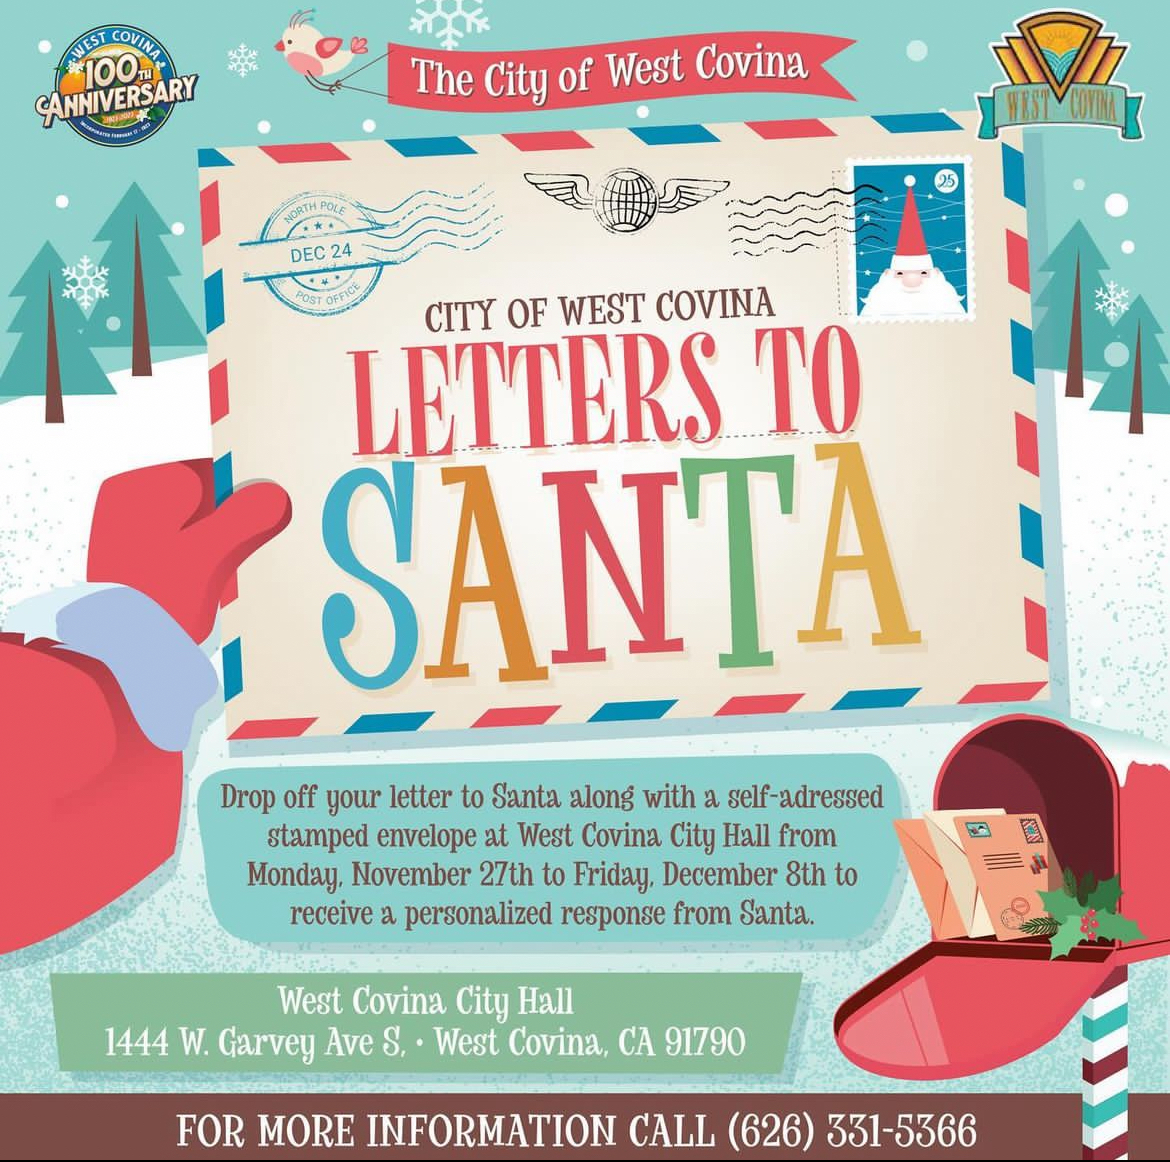 City of West Covina advertises Letters to Santa to encourage kids and other participants to send off their letters to Santa.  